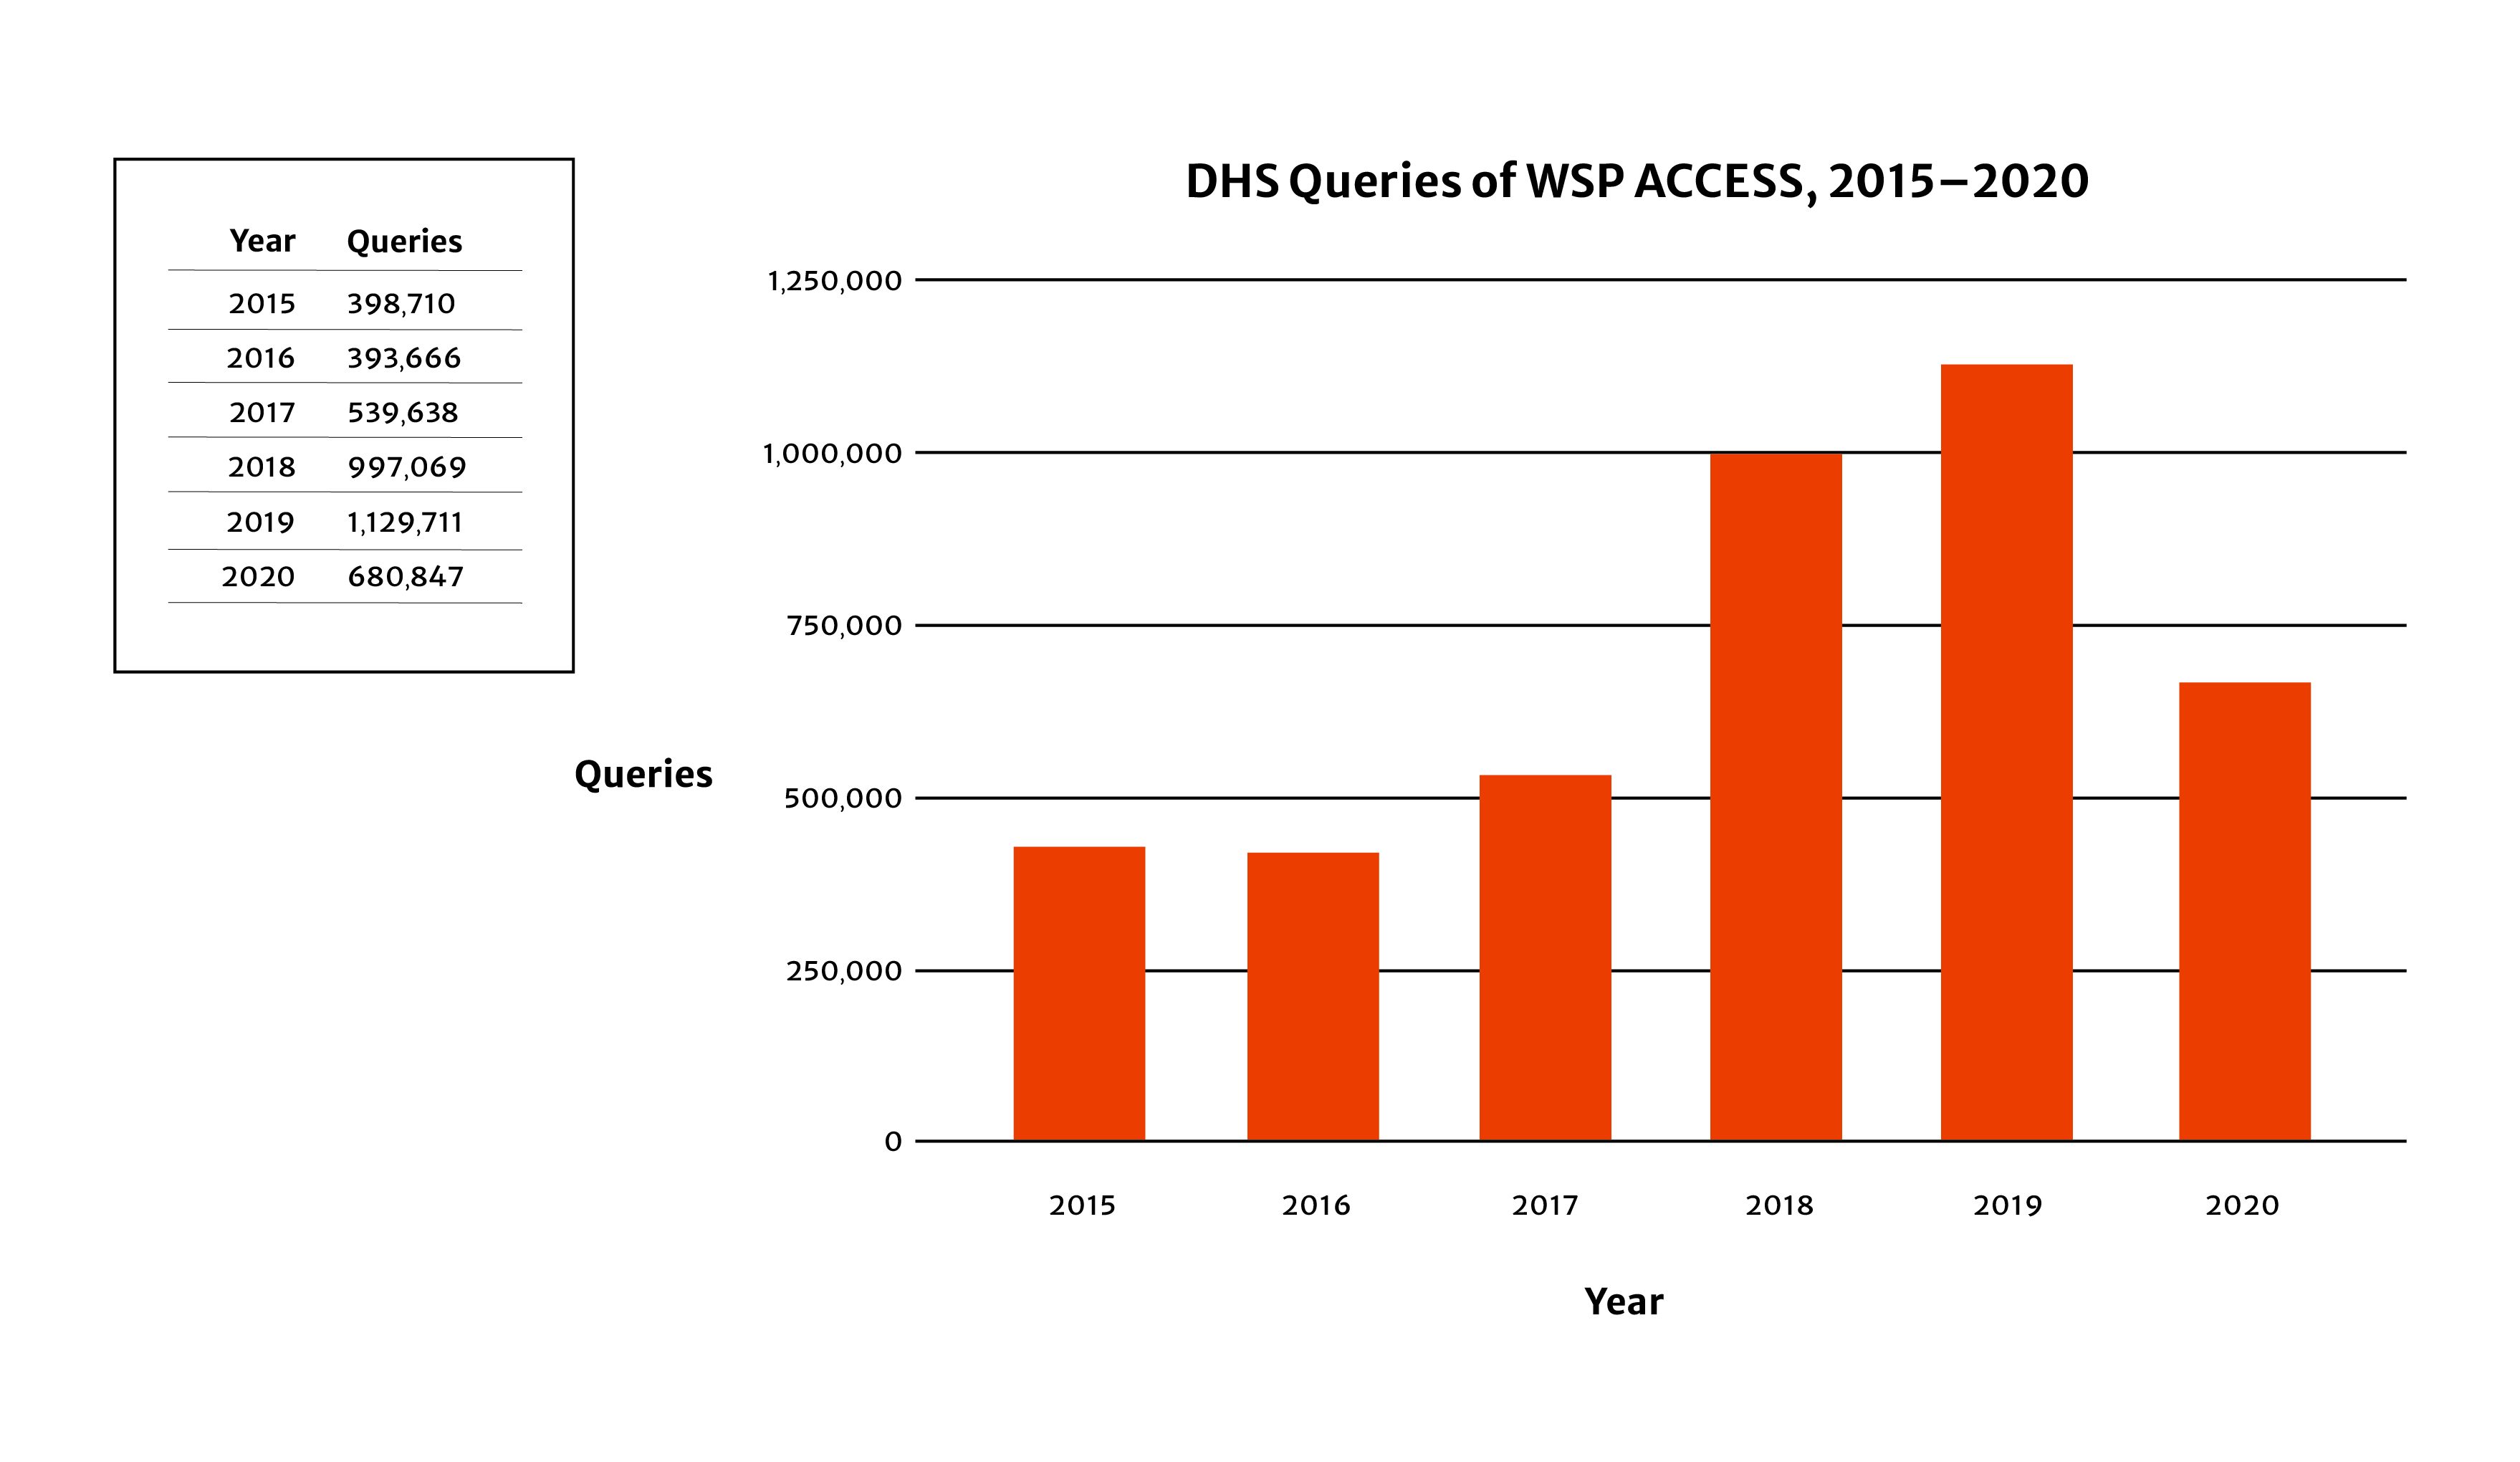 A figure depicts DHS queries of WSP Access from 2015 to 2020. The number of queries remains stagnant between 2015 to 2016. From 2016 to 2019, the number of queries increases before declining between the years of 2019 and 2020.